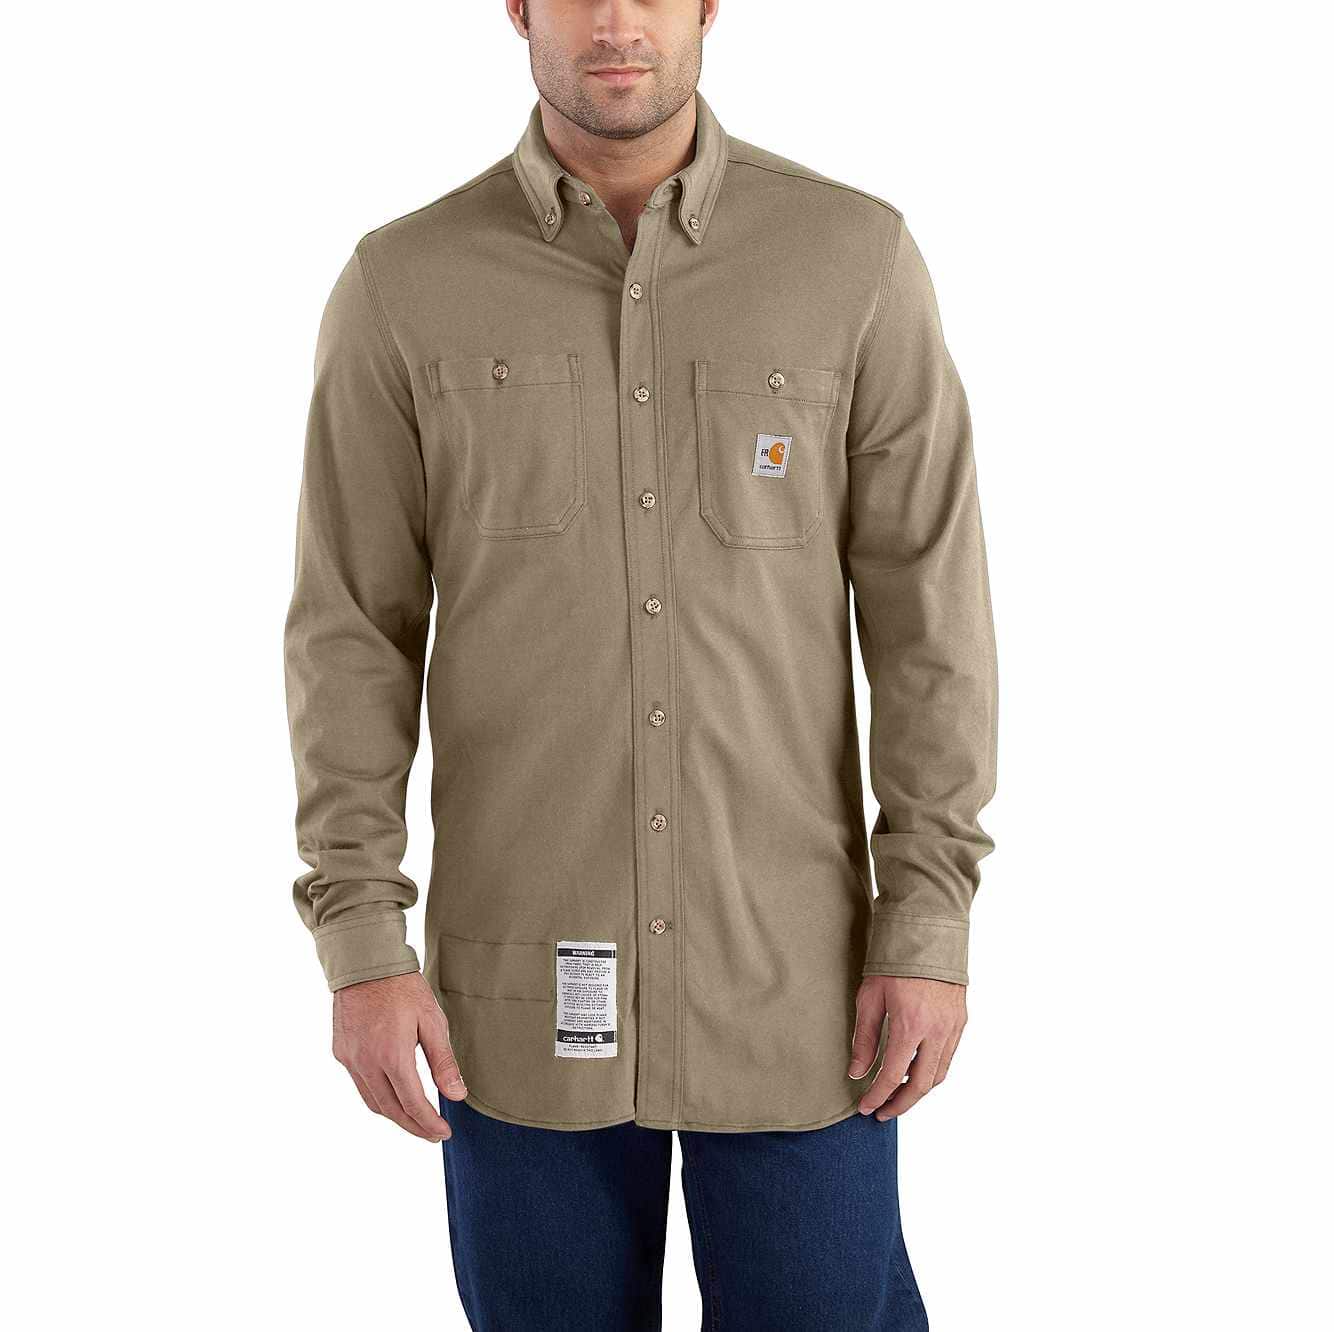 khakis and button down shirt